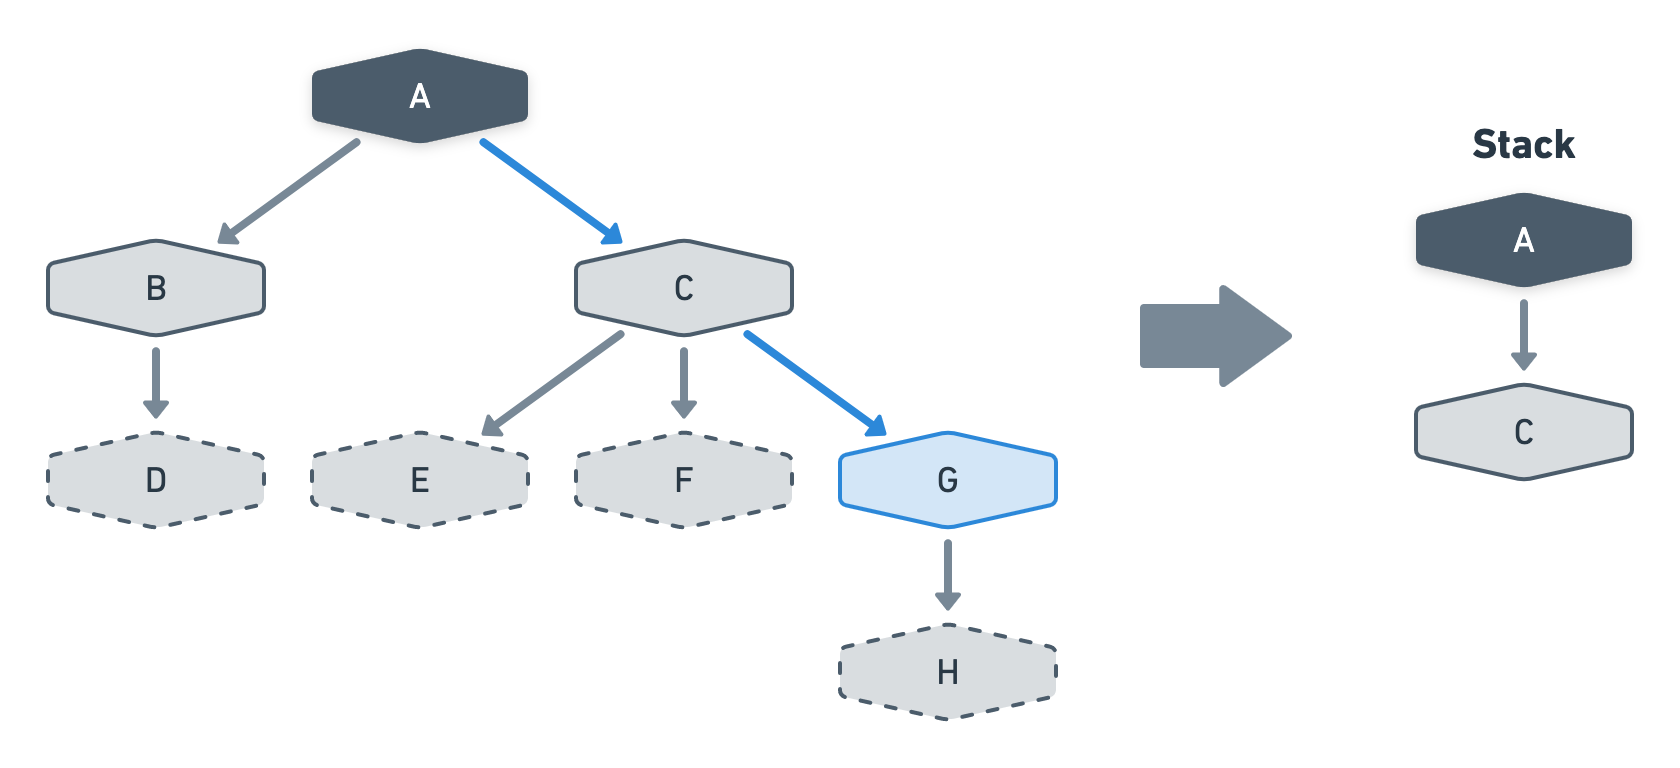 A tree of nodes where each node is labelled from A to H. Node G is highlighted. G's parent is C and C's parent is the root node A. On the right side of the tree, there is an arrow pointing right. Next to that arrow is a subset of the tree of the left made of only A and C. The tree on the right is labelled "Stack".